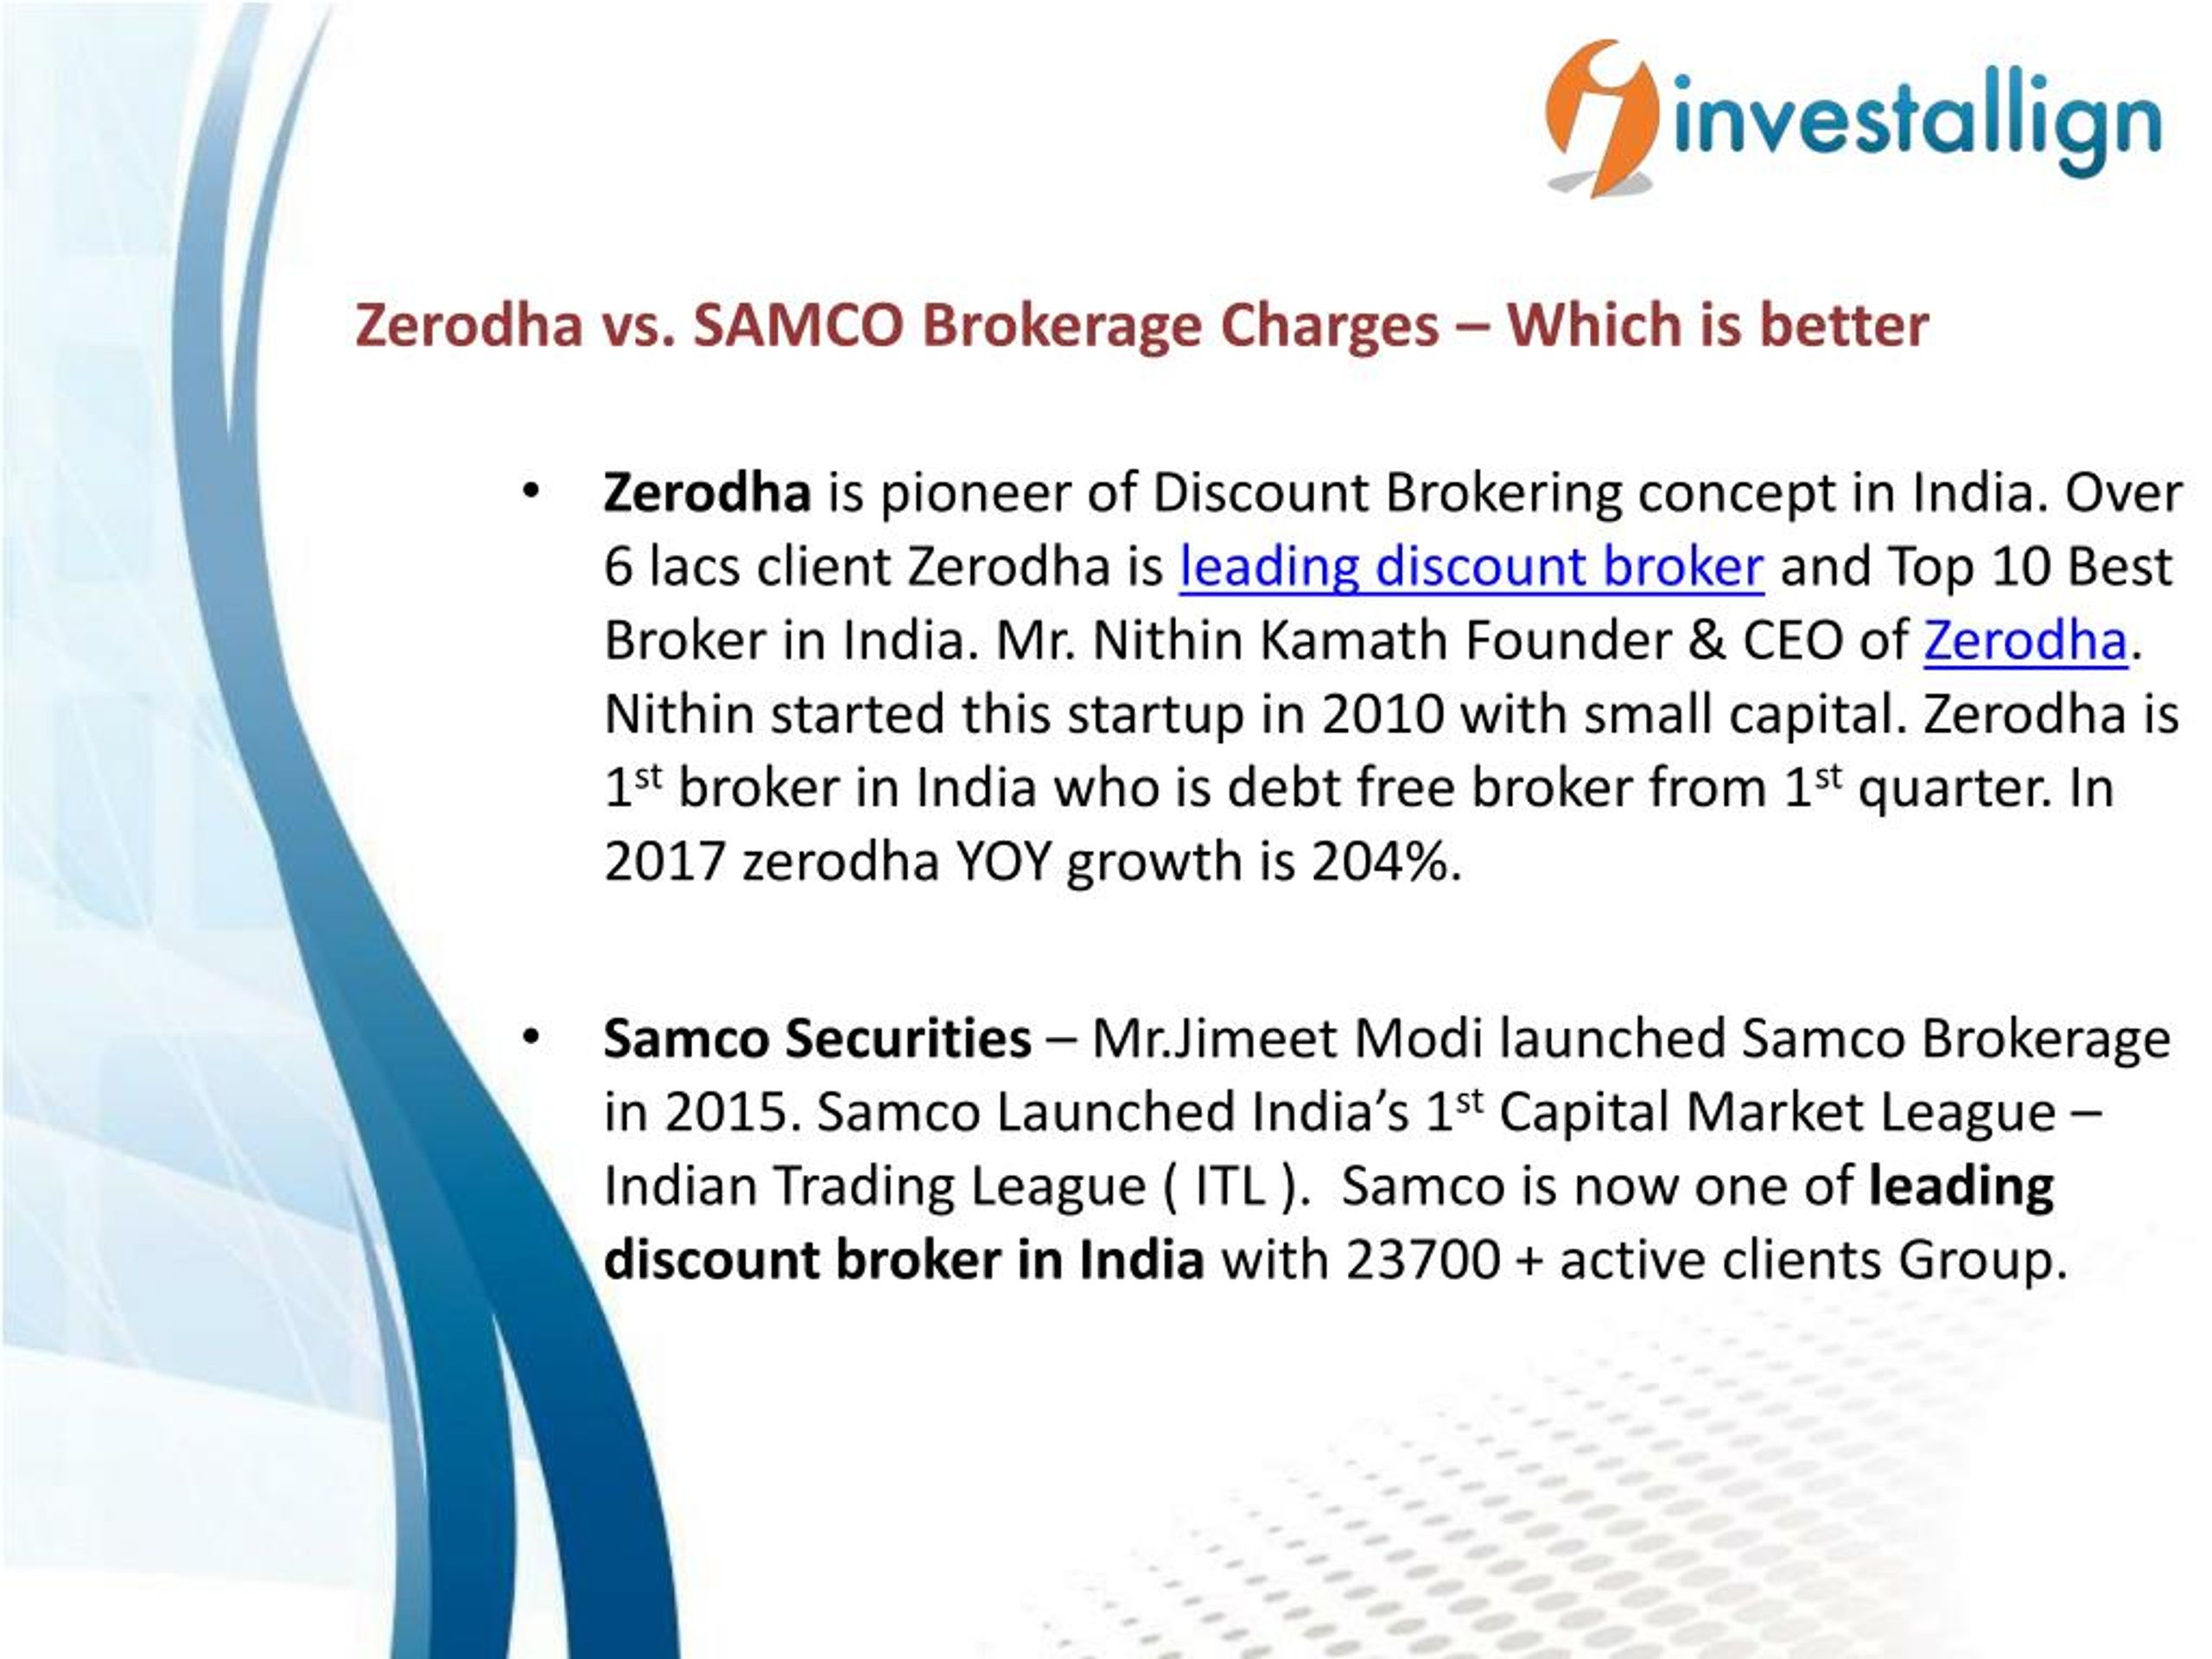 Ppt Compare Zerodha Vs Samco Brokerage Charges Investallign Powerpoint Presentation Id7820446 7355